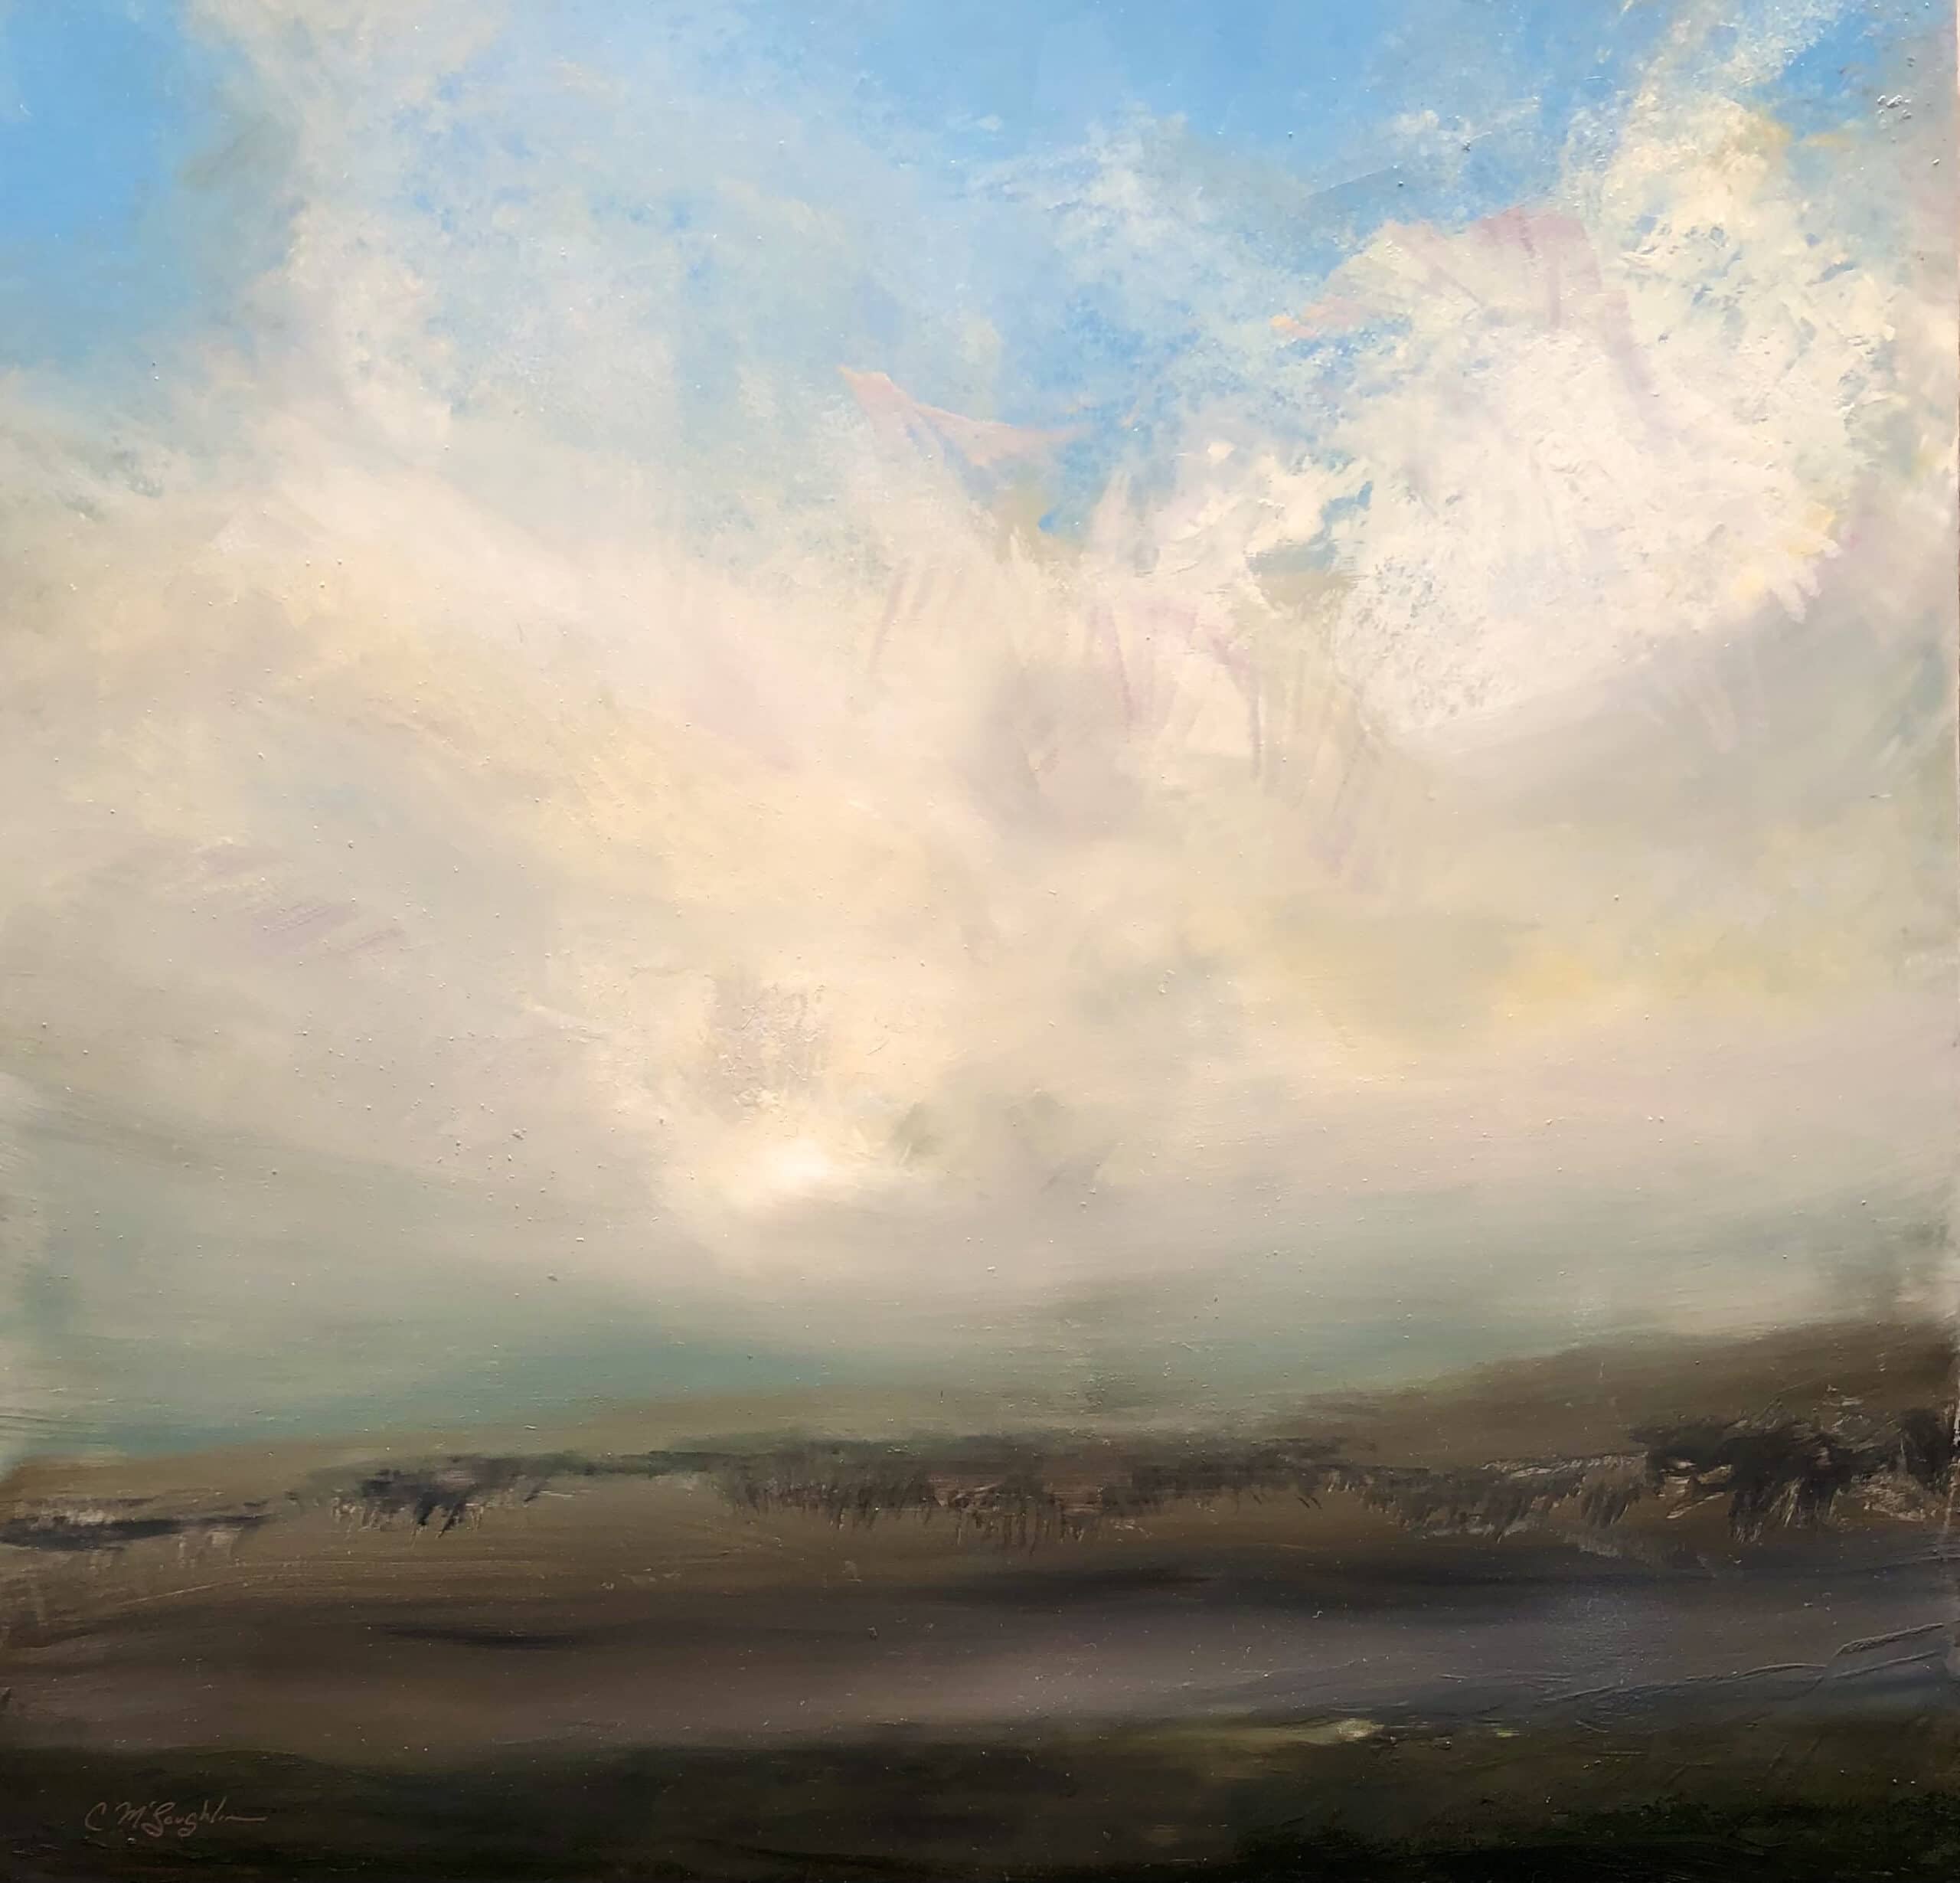 An original oil painting on metal panel by artist Cynthia McLoughlin of an exploding cloudscape over a ghostly buffalo herd in the wild.